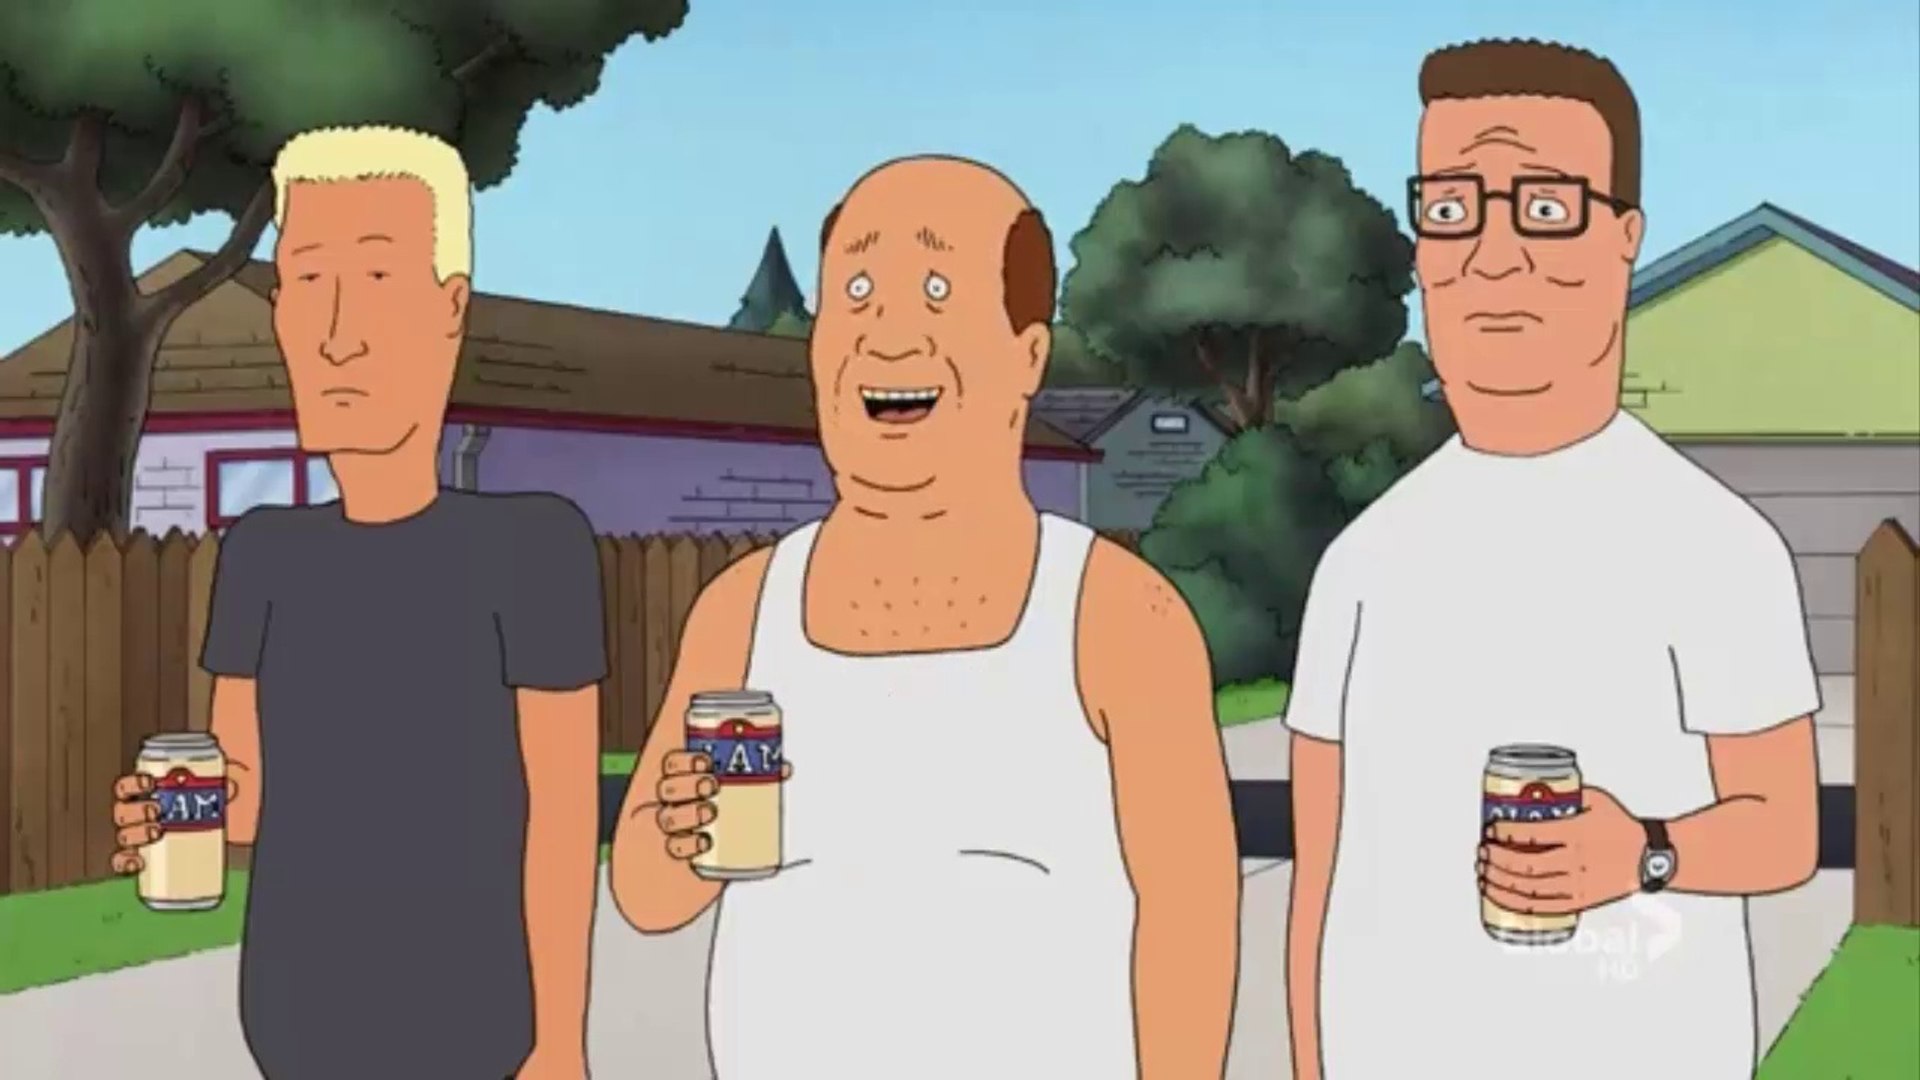 King of the Hill S13 - 21 - The Honeymooners - video Dailymotion